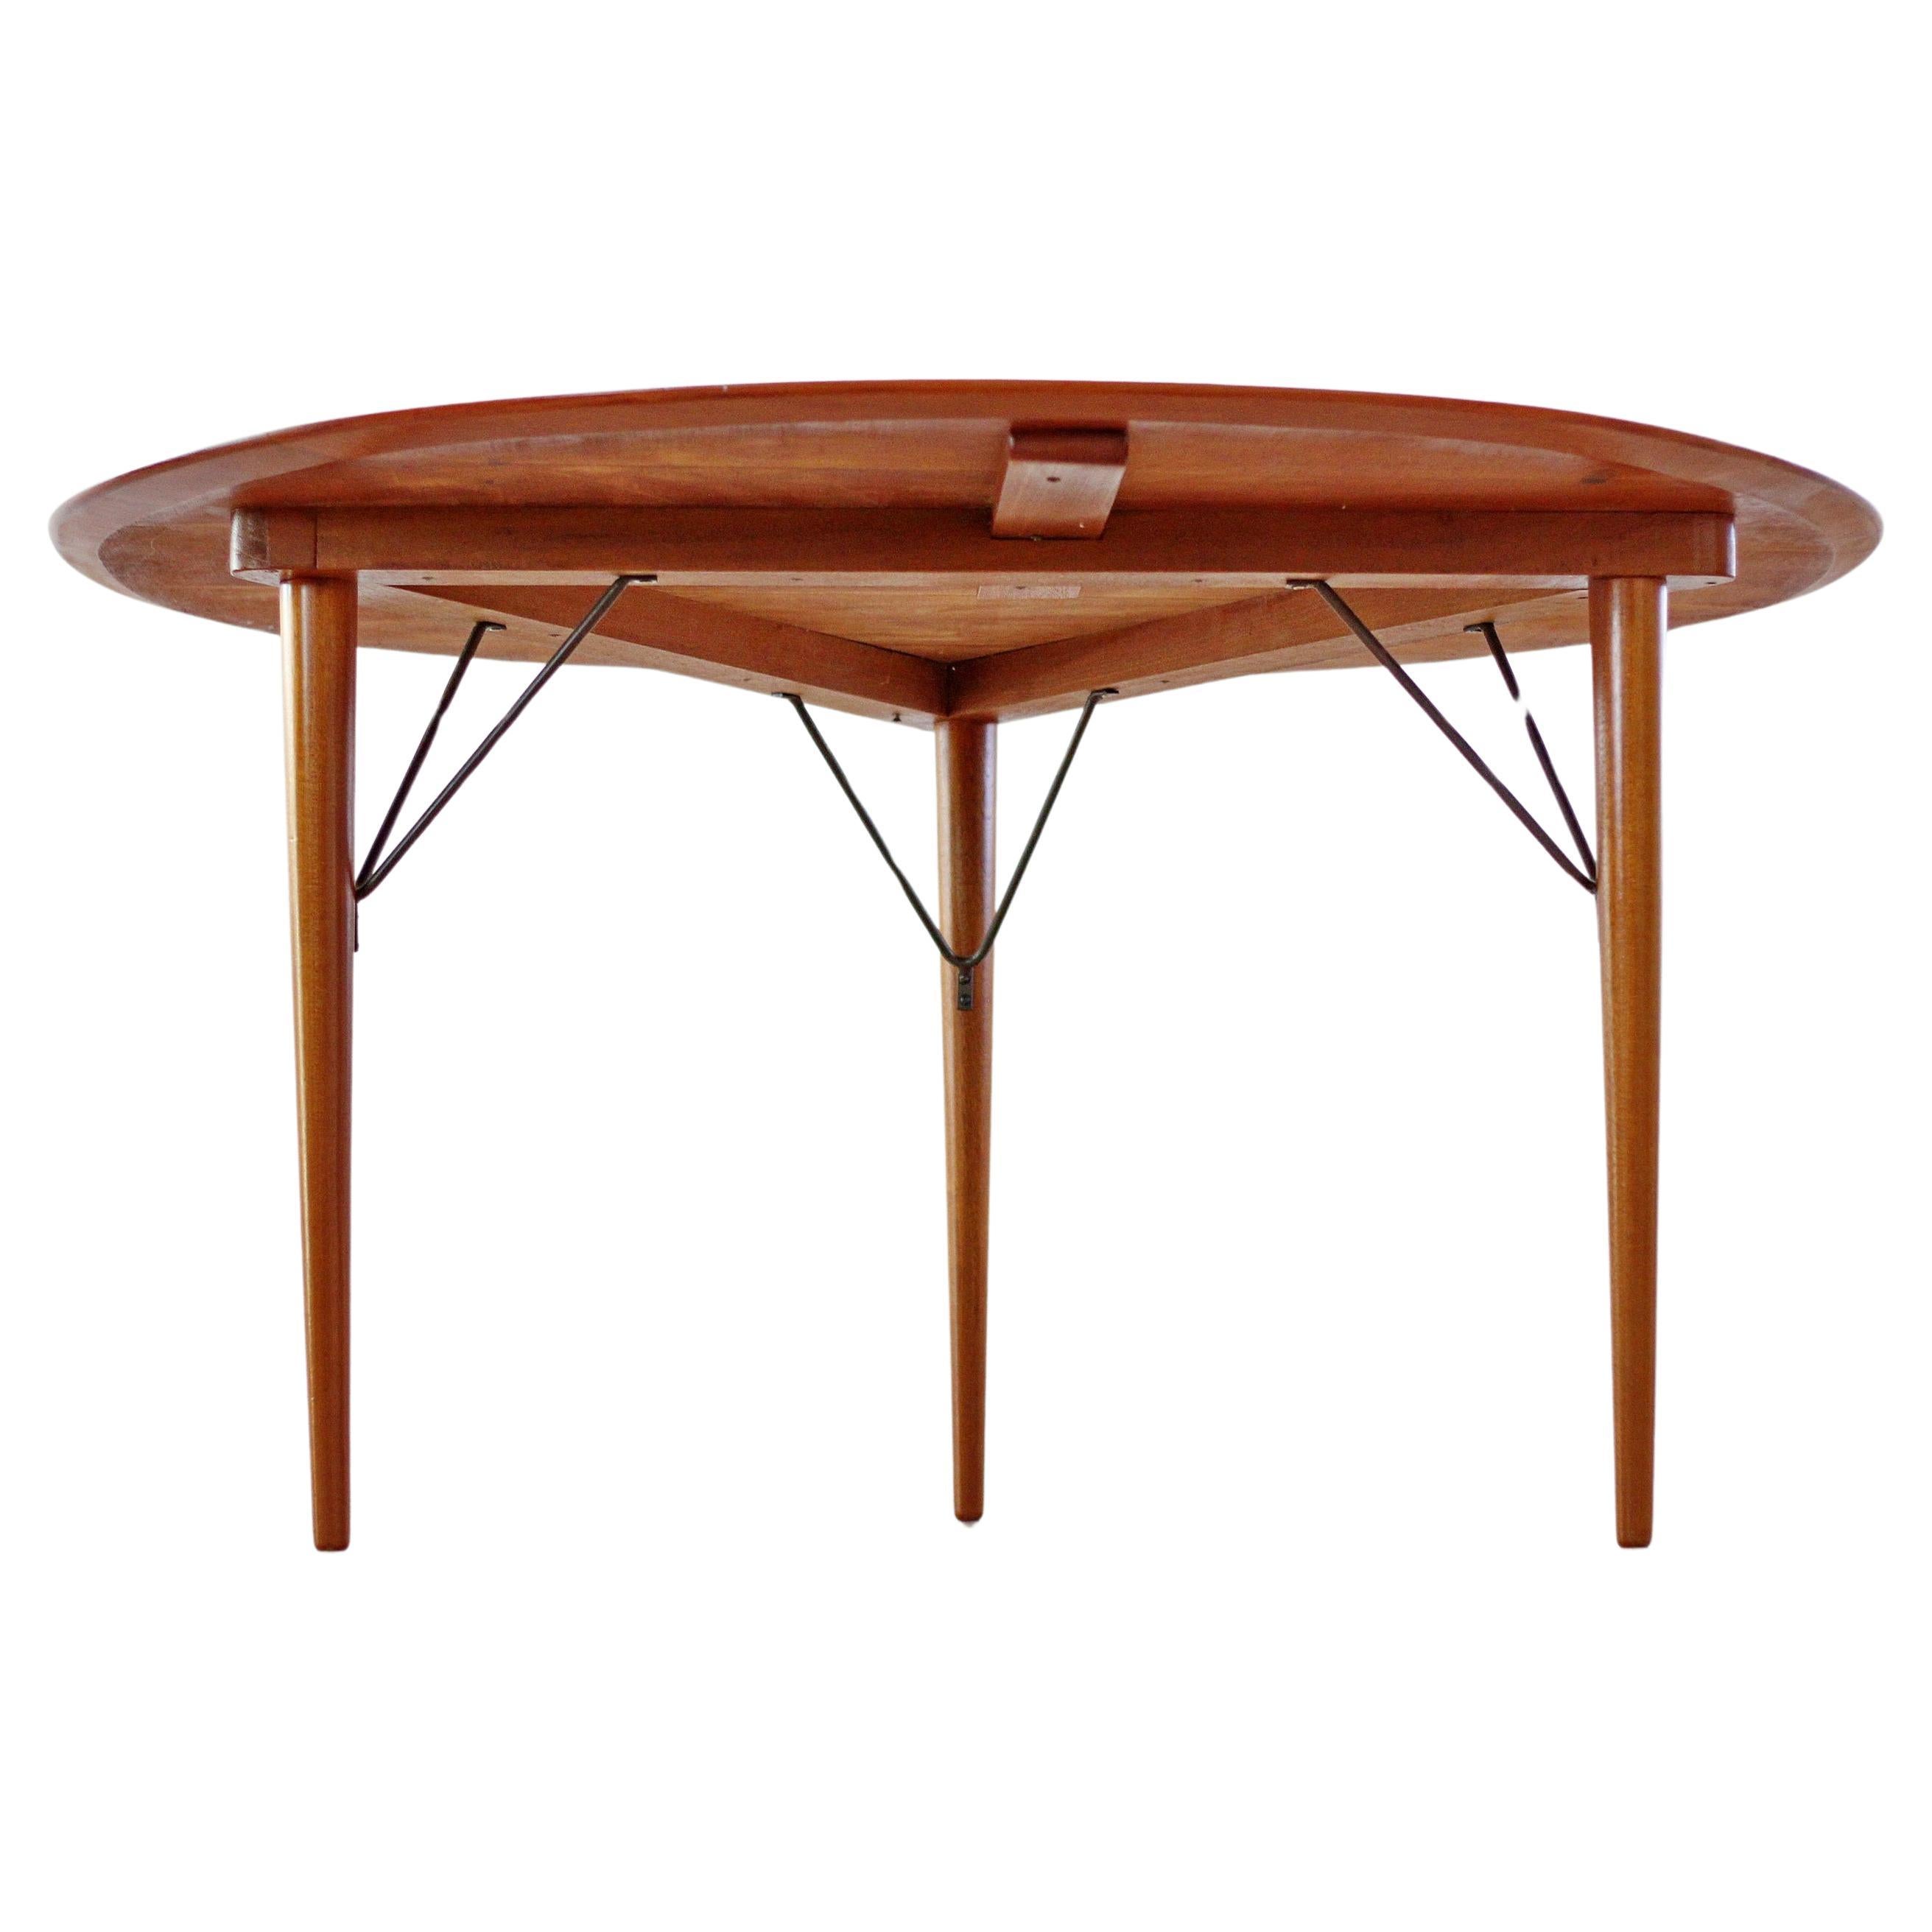 New Zealand Dining Room Tables